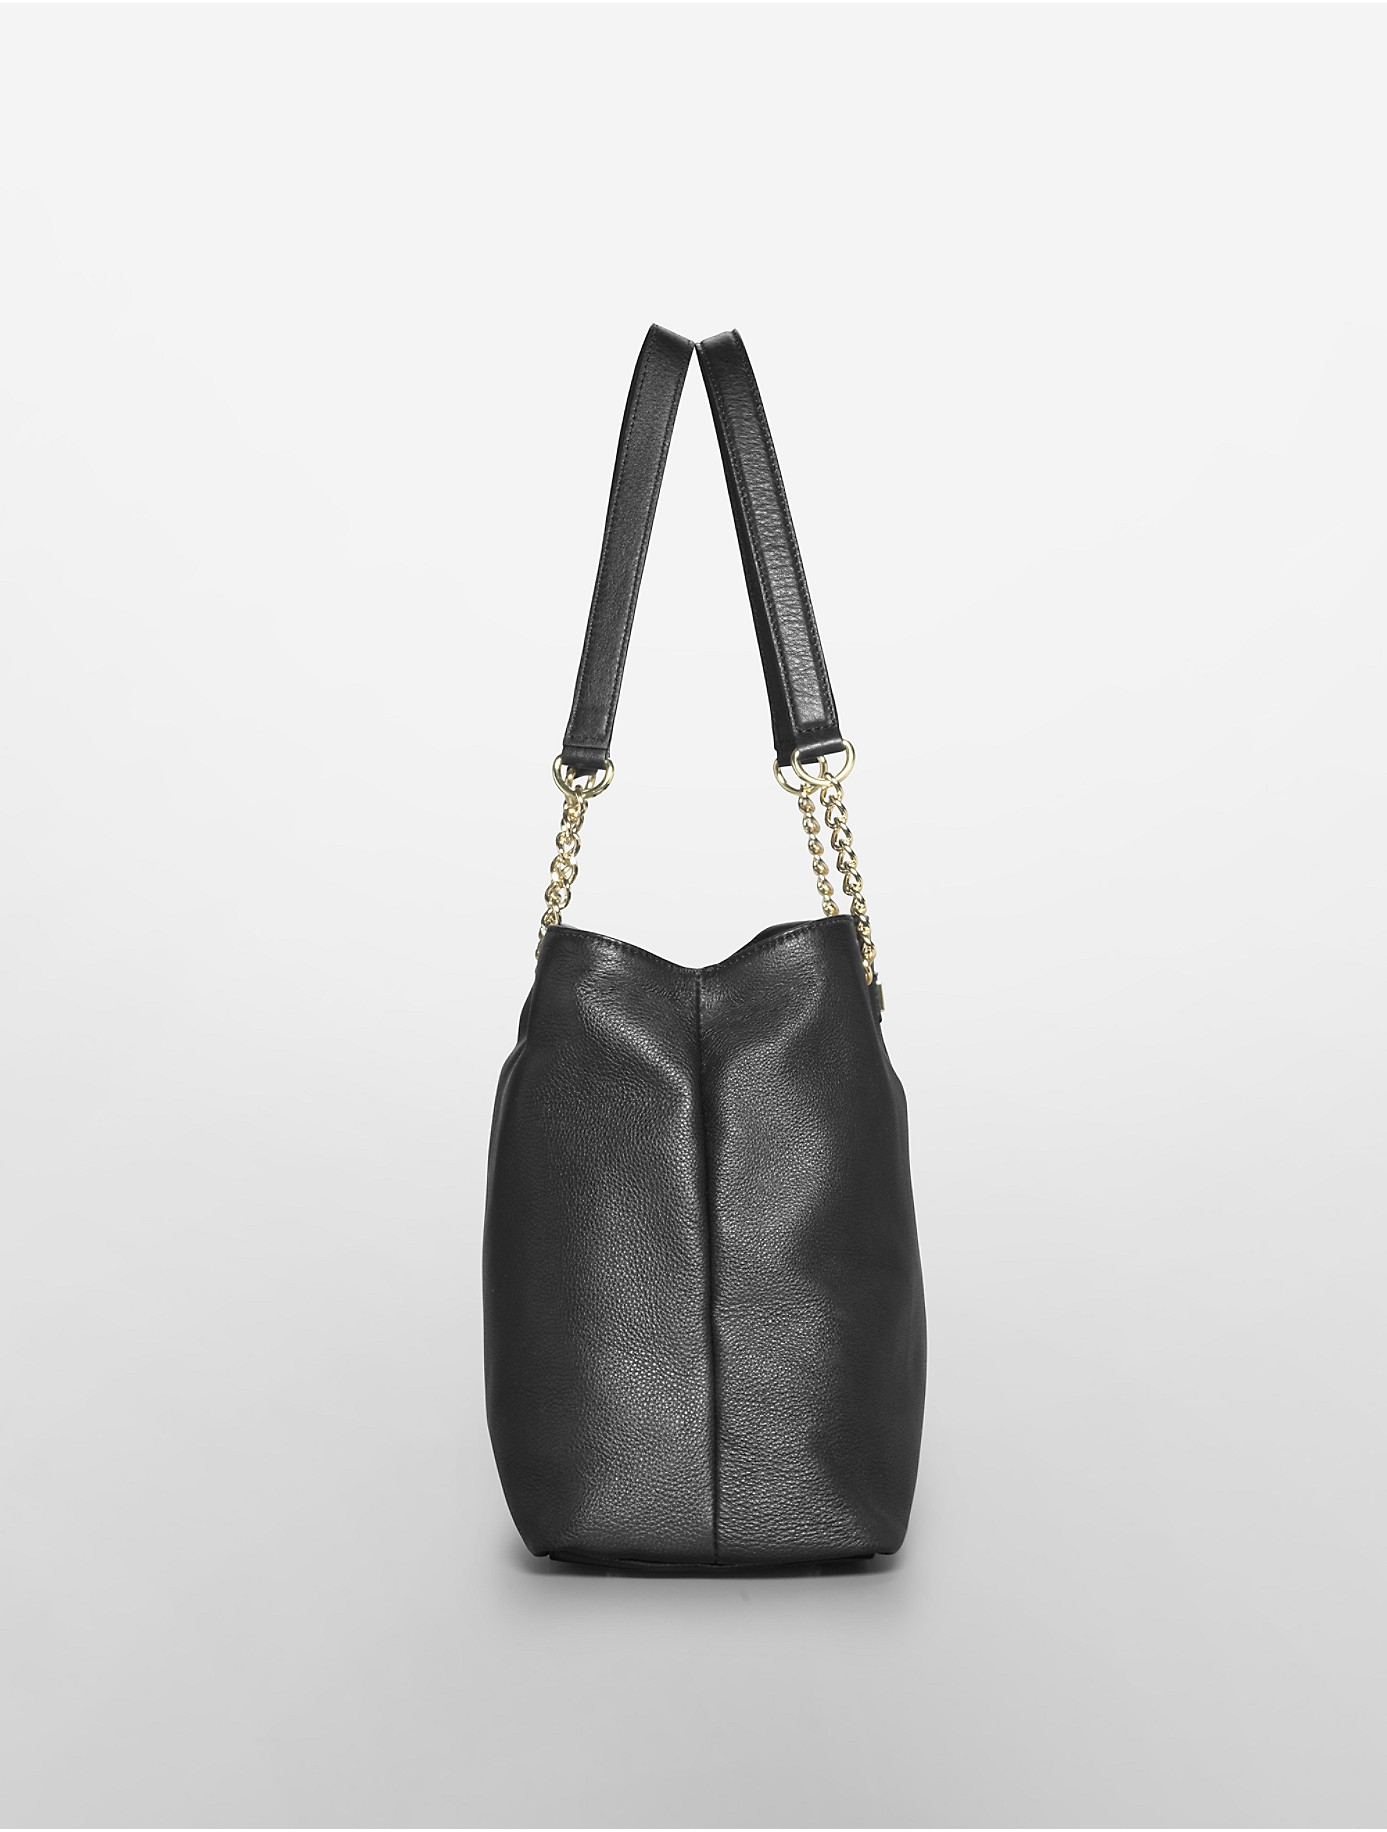 Lyst - Calvin Klein Chain Detail Leather Capacity Tote in Black